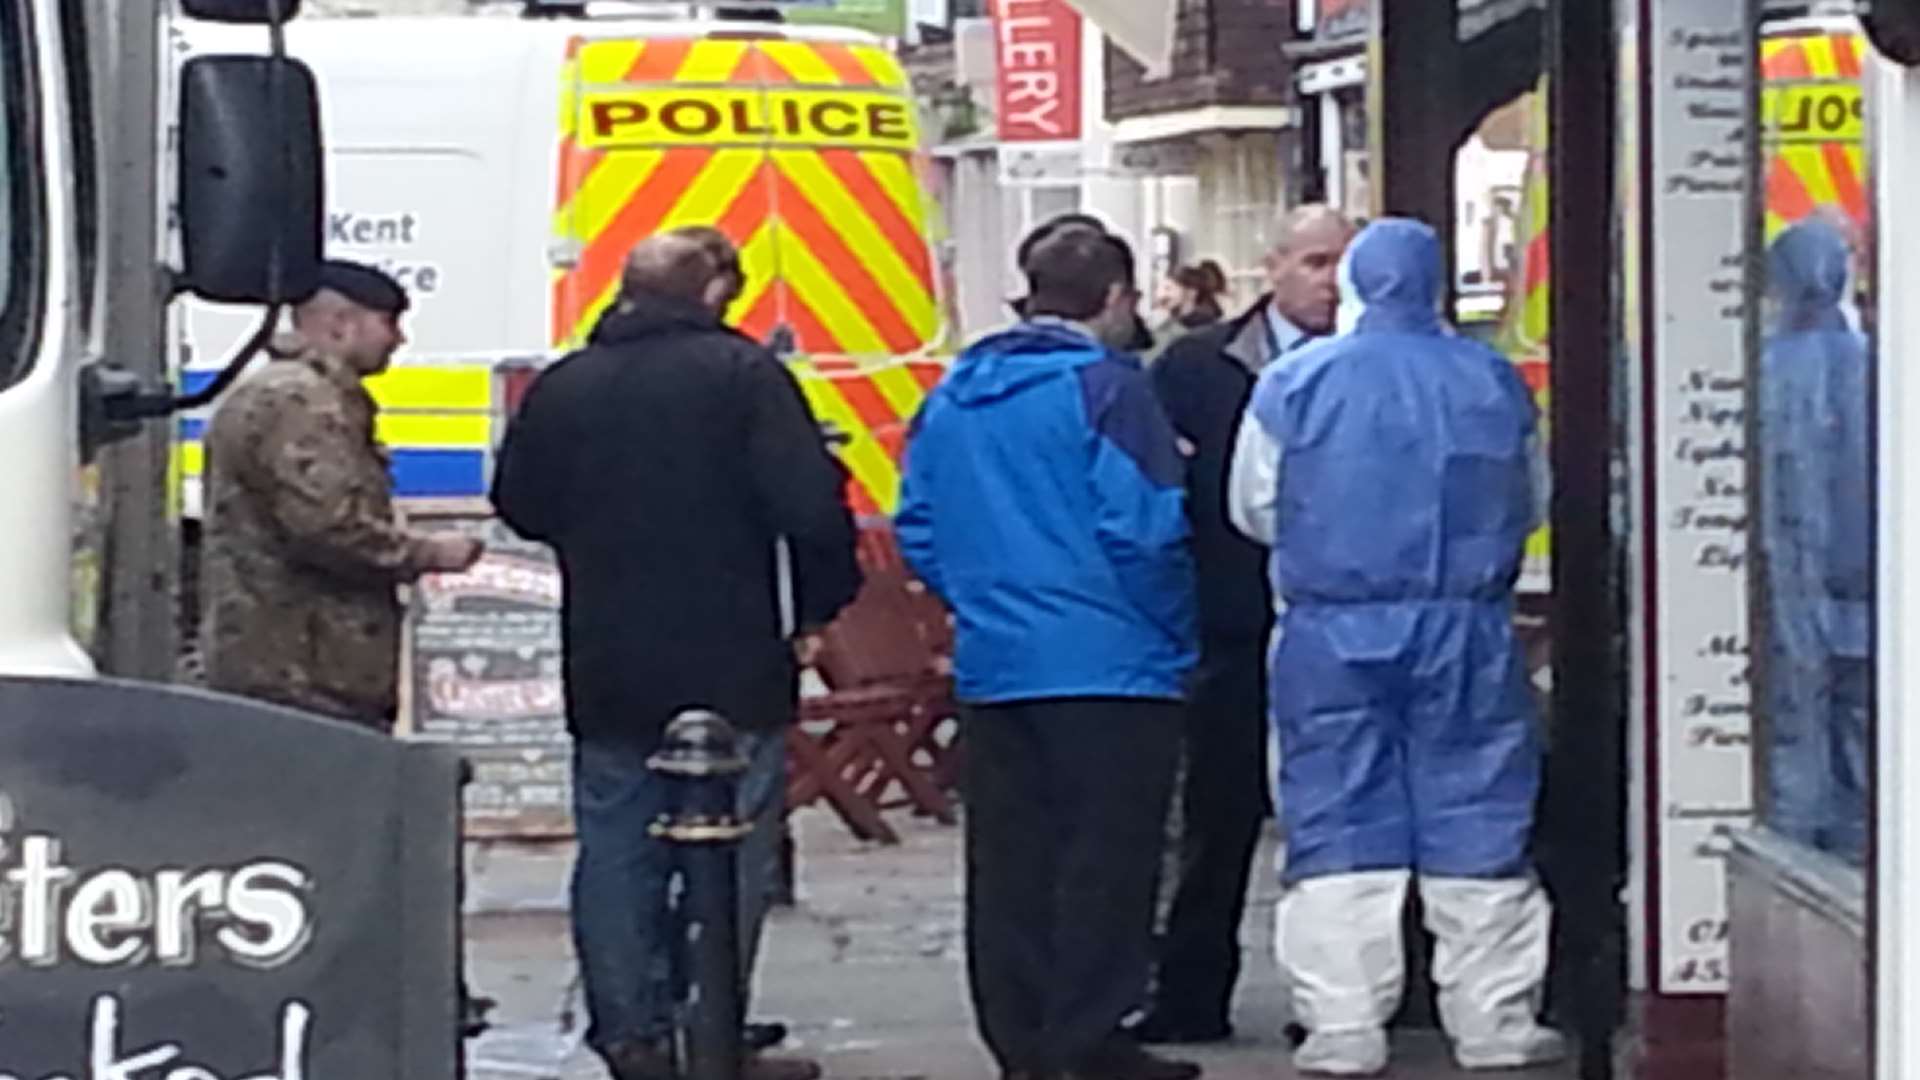 Bomb disposal teams at the scene in Canterbury